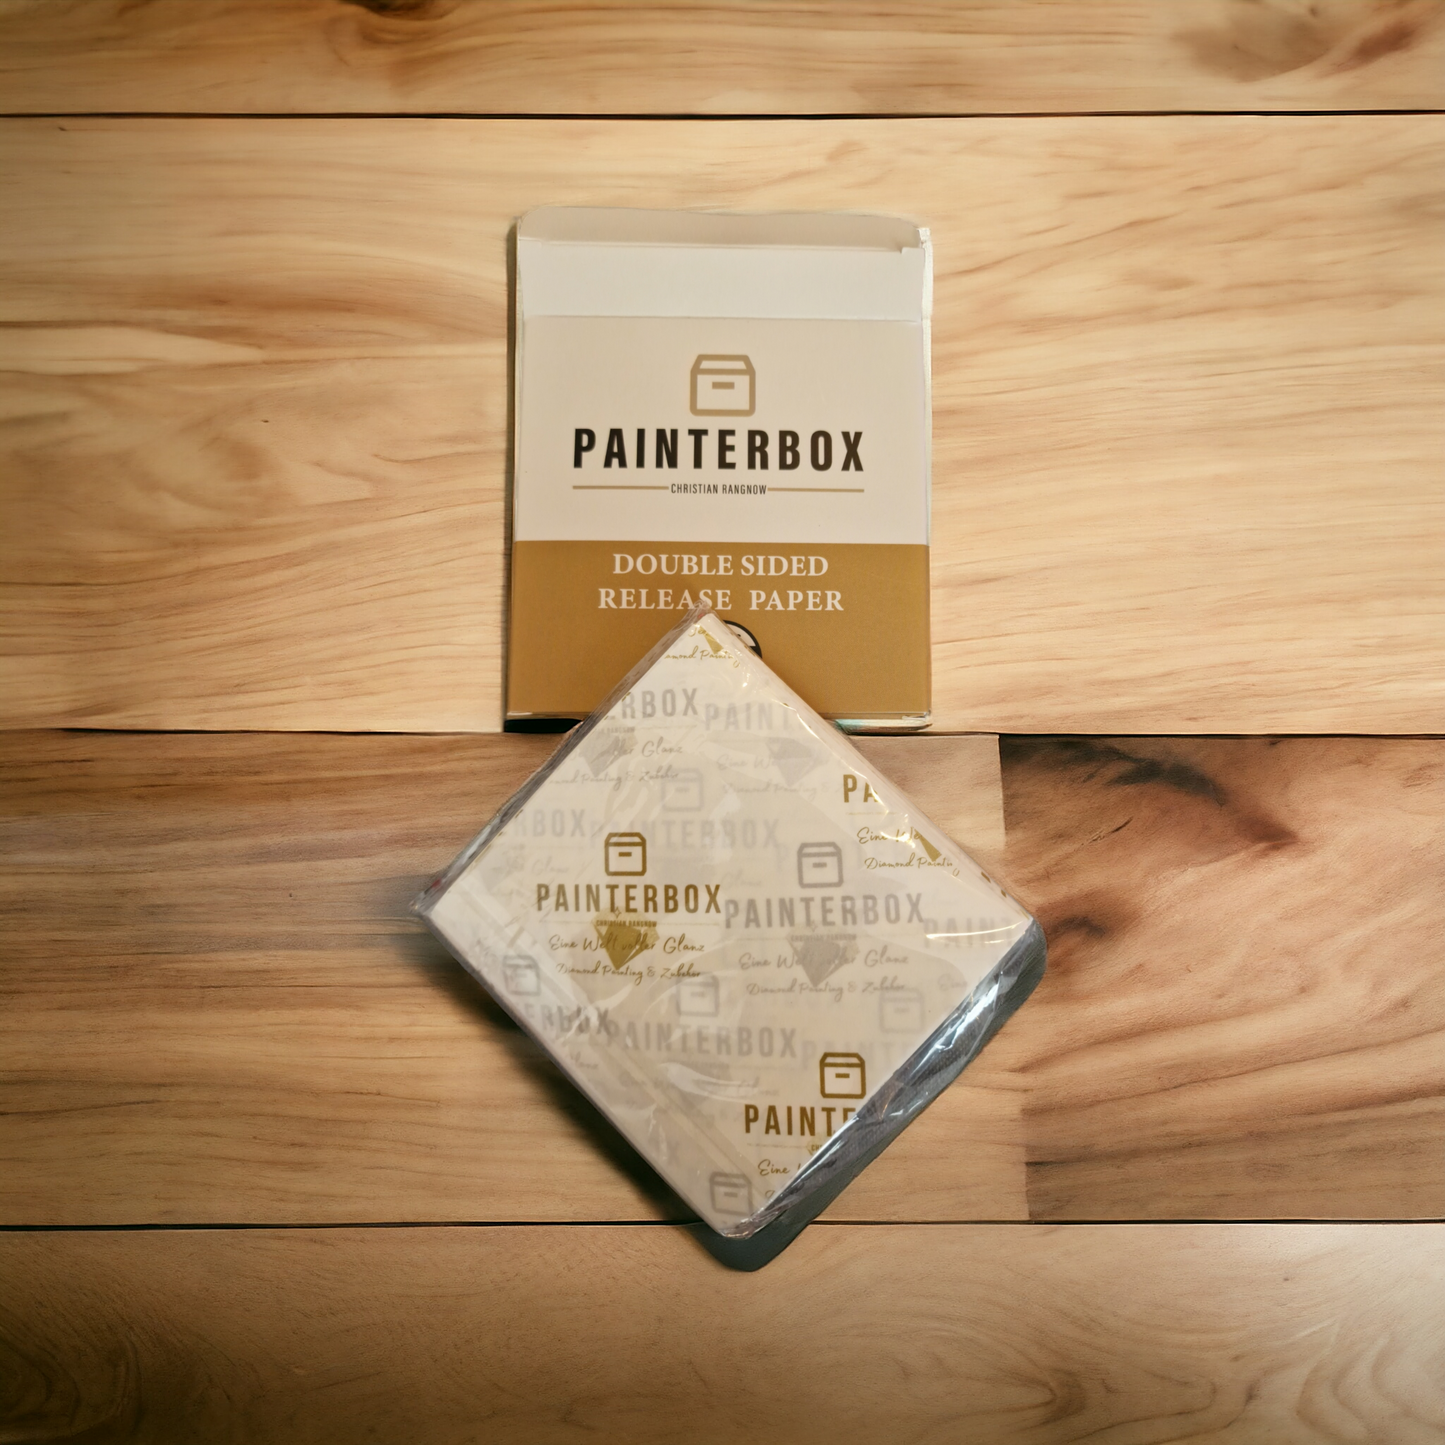 "Painterbox" Double Sided Release Paper